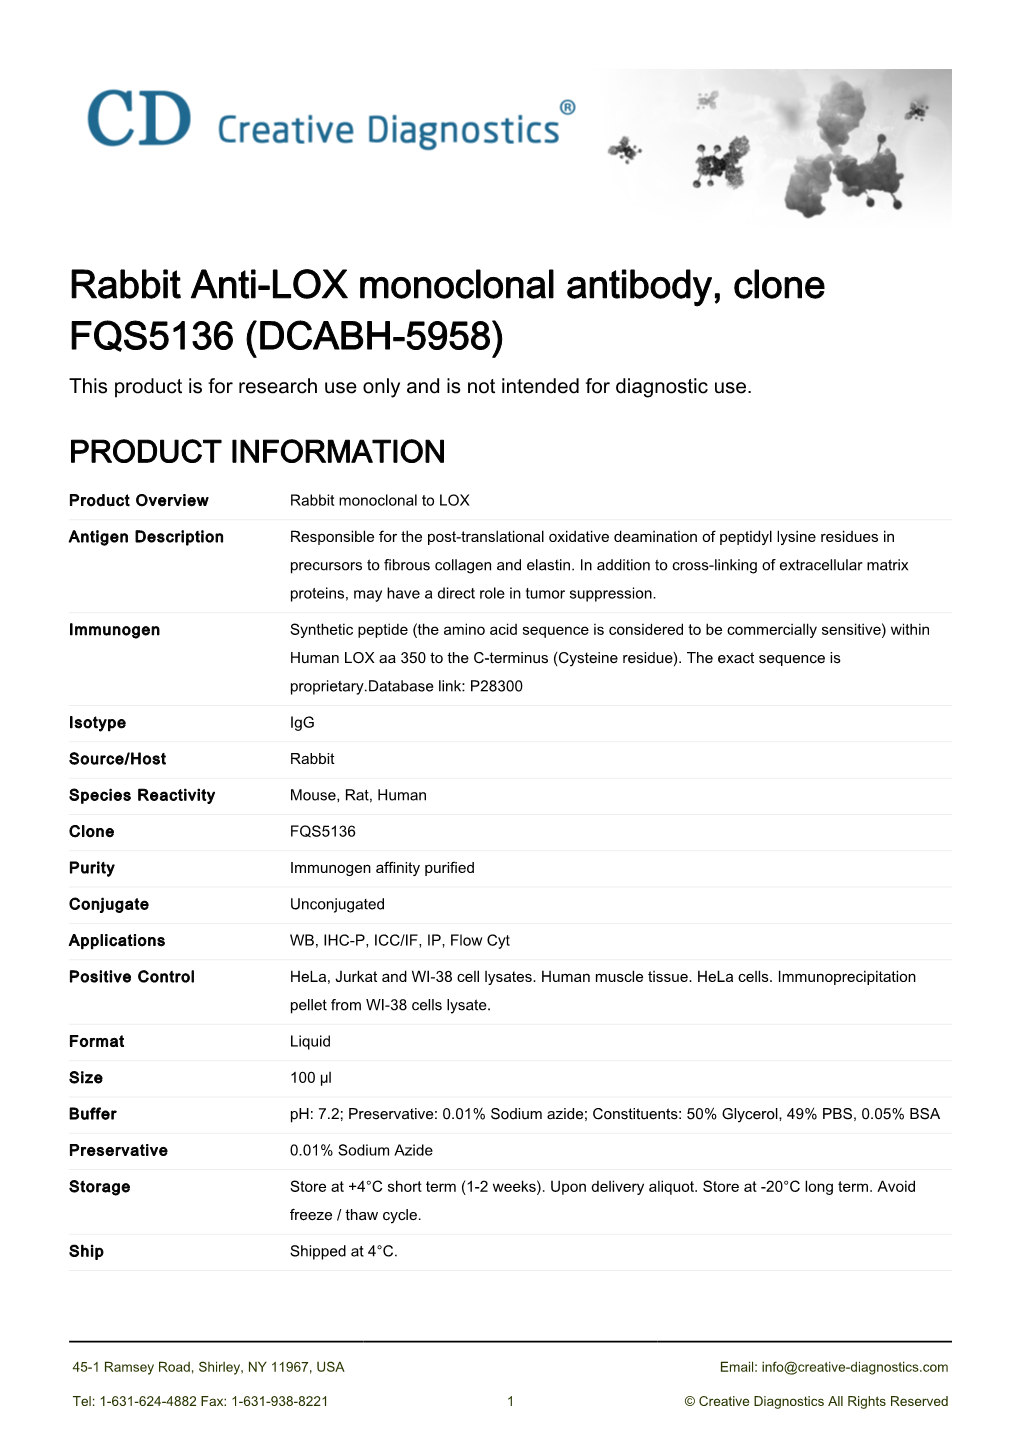 Rabbit Anti-LOX Monoclonal Antibody, Clone FQS5136 (DCABH-5958) This Product Is for Research Use Only and Is Not Intended for Diagnostic Use